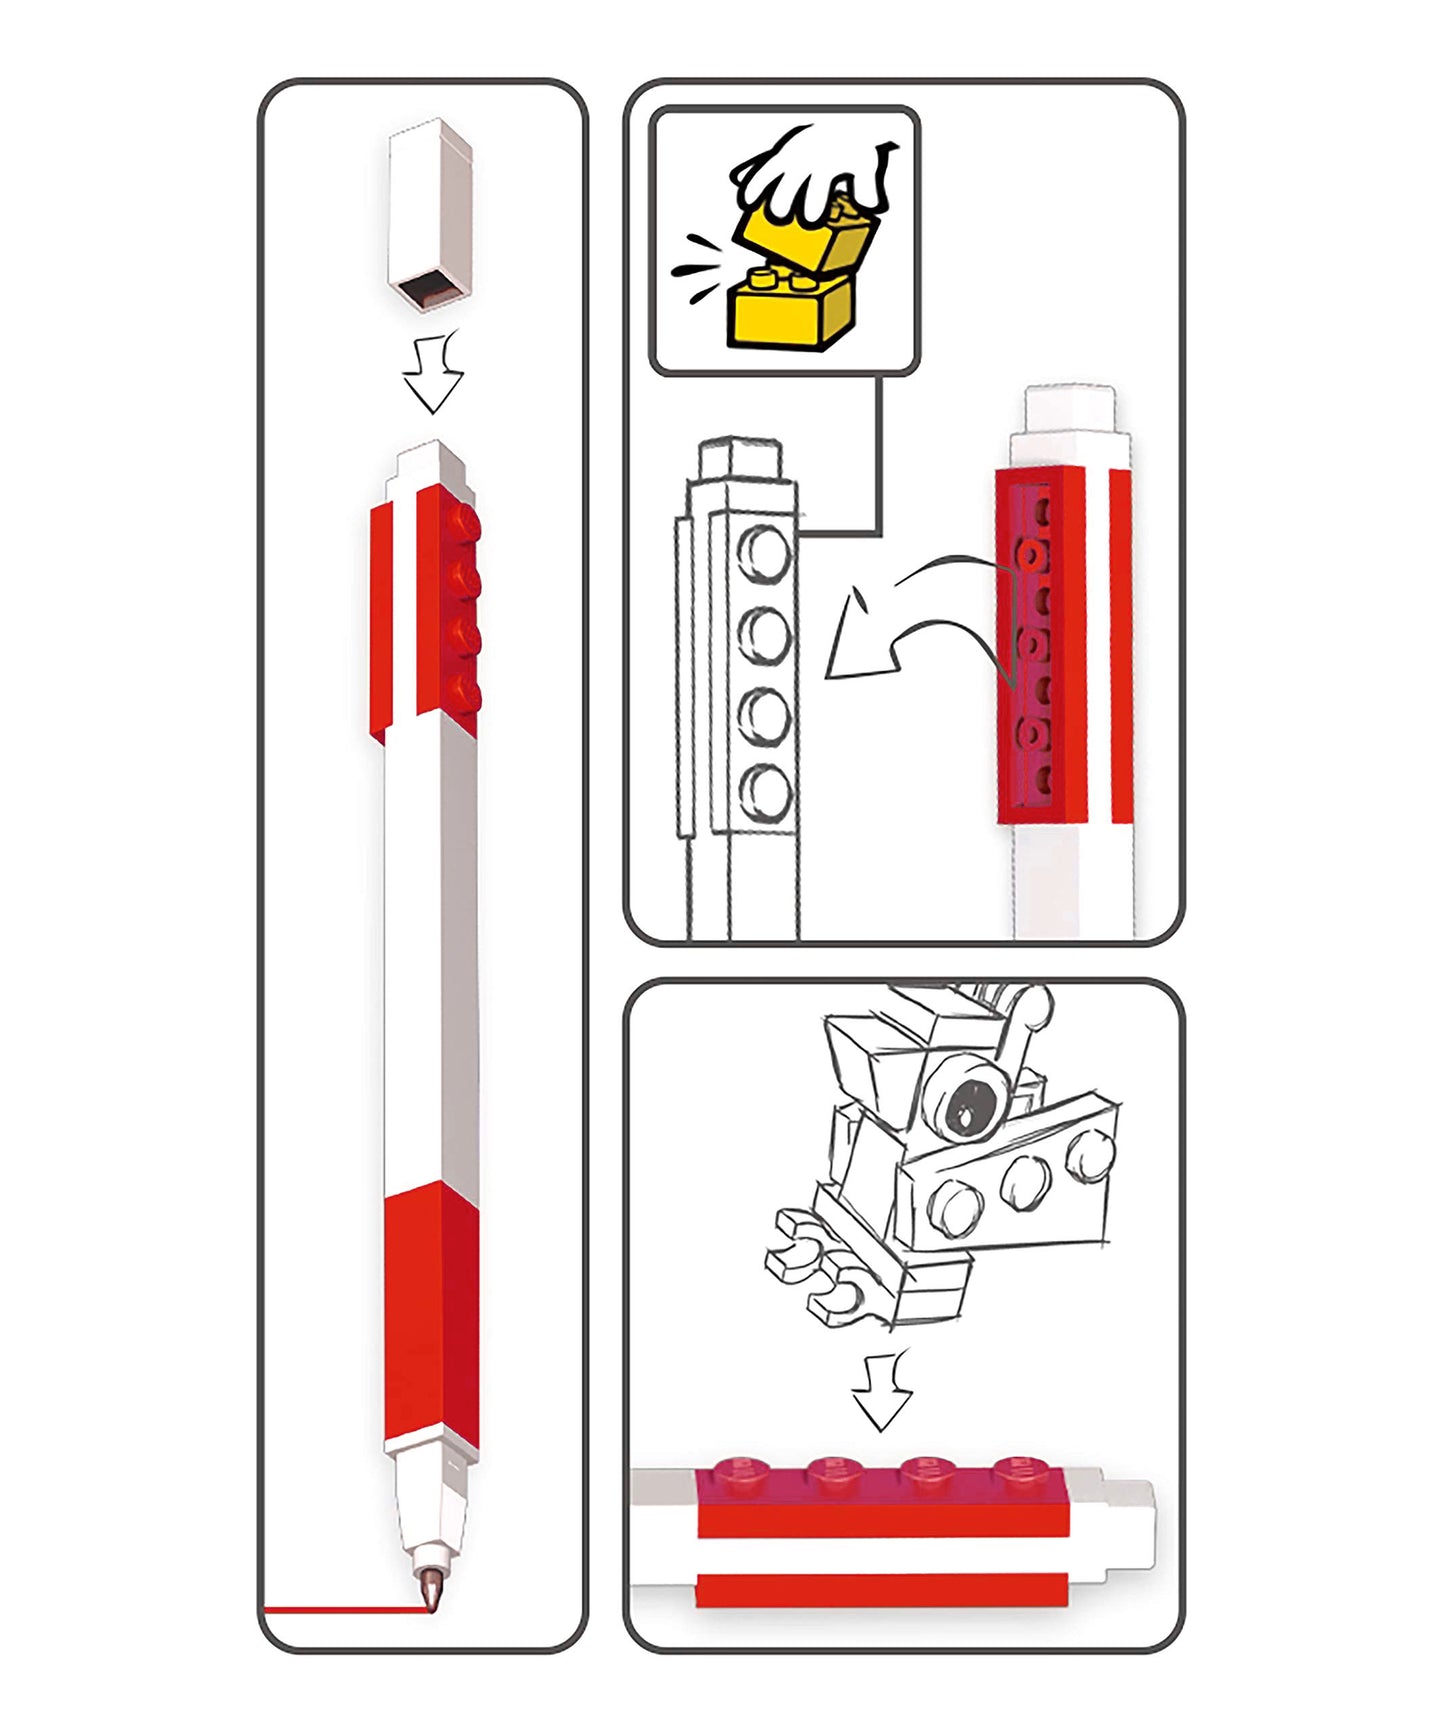 IQ LEGO® 2.0 Stationery Red Gel Pen with Minifigure (52602)